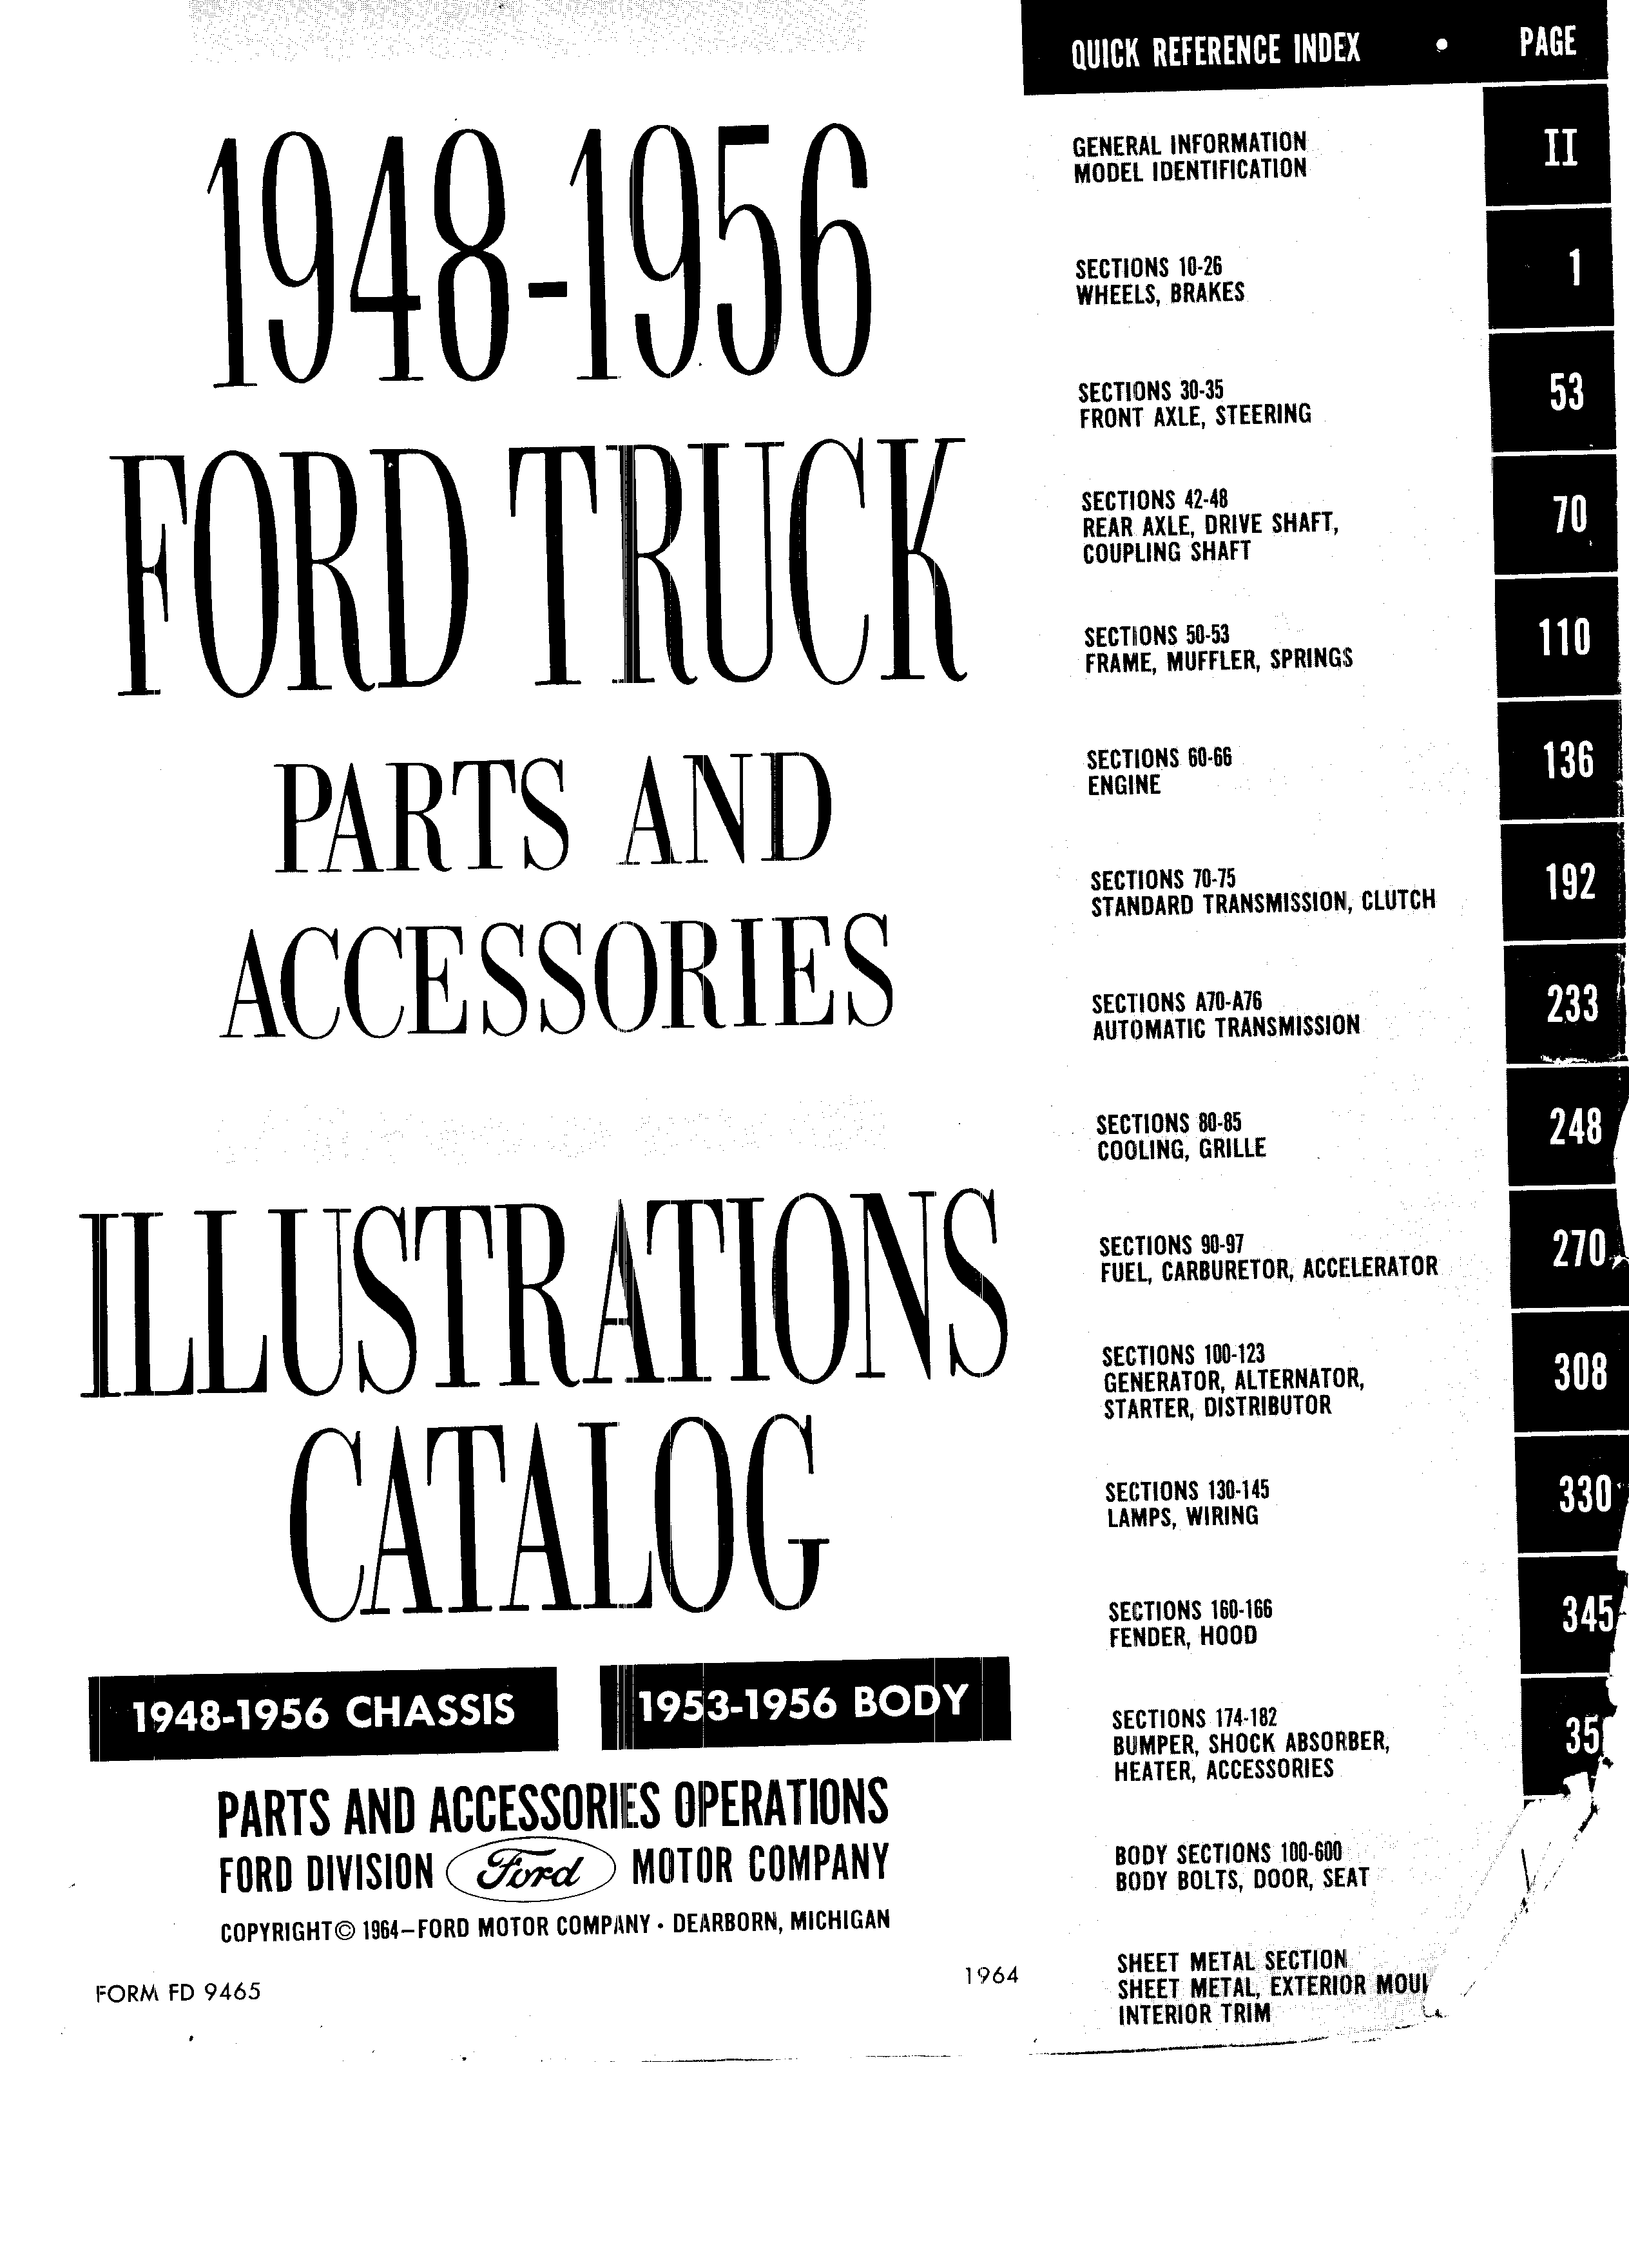 Ford Truck Parts and Accessories Illustration Catalog FD 9465 January 1964